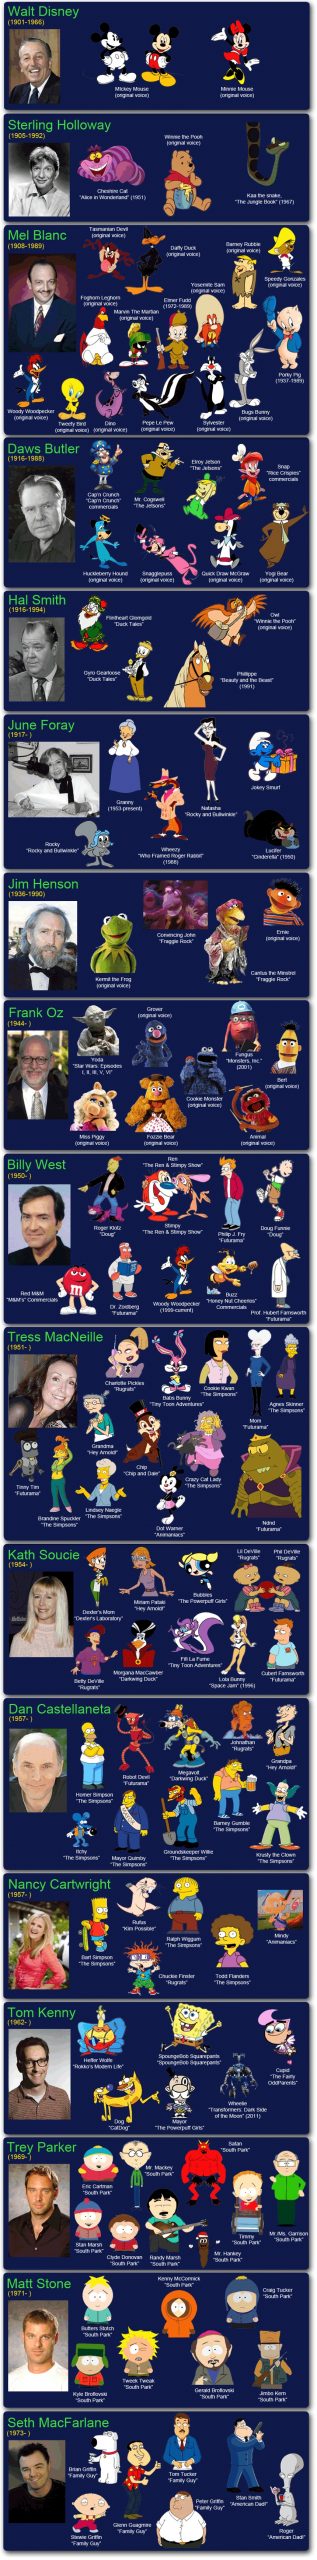 List of The Famous Voice Actors & Actresses Behind Your Favorite Cartoons